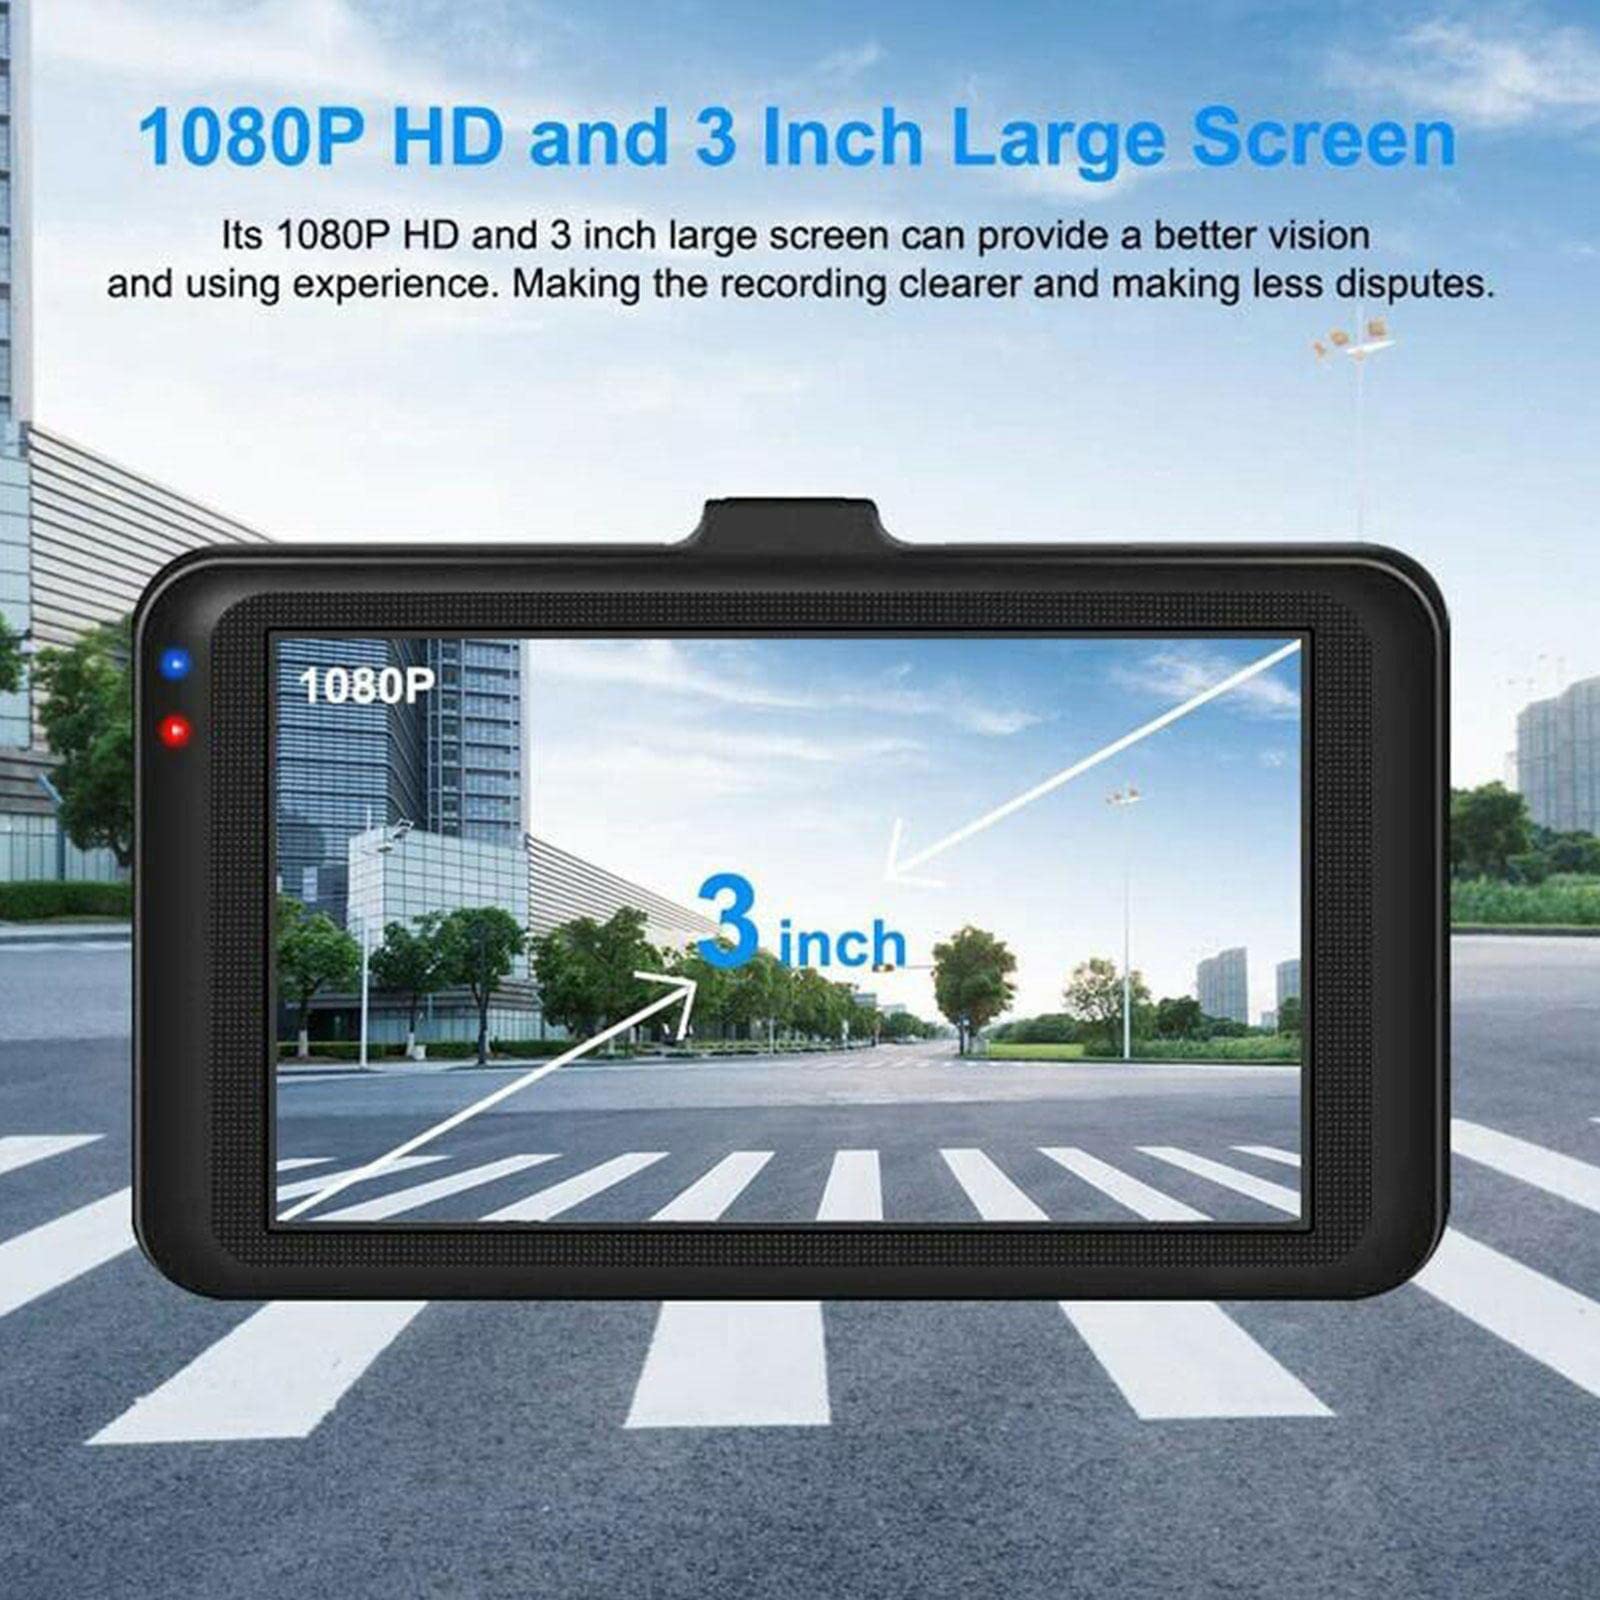 HX Studio Dash Cam,Dash Camera for Car,3 Inch LCD Screen,720P Full HD Car Dashboard Recorder,120° Wide Angle Dashcam,Night Vision,WDR, Motion Detection, Parking Mode